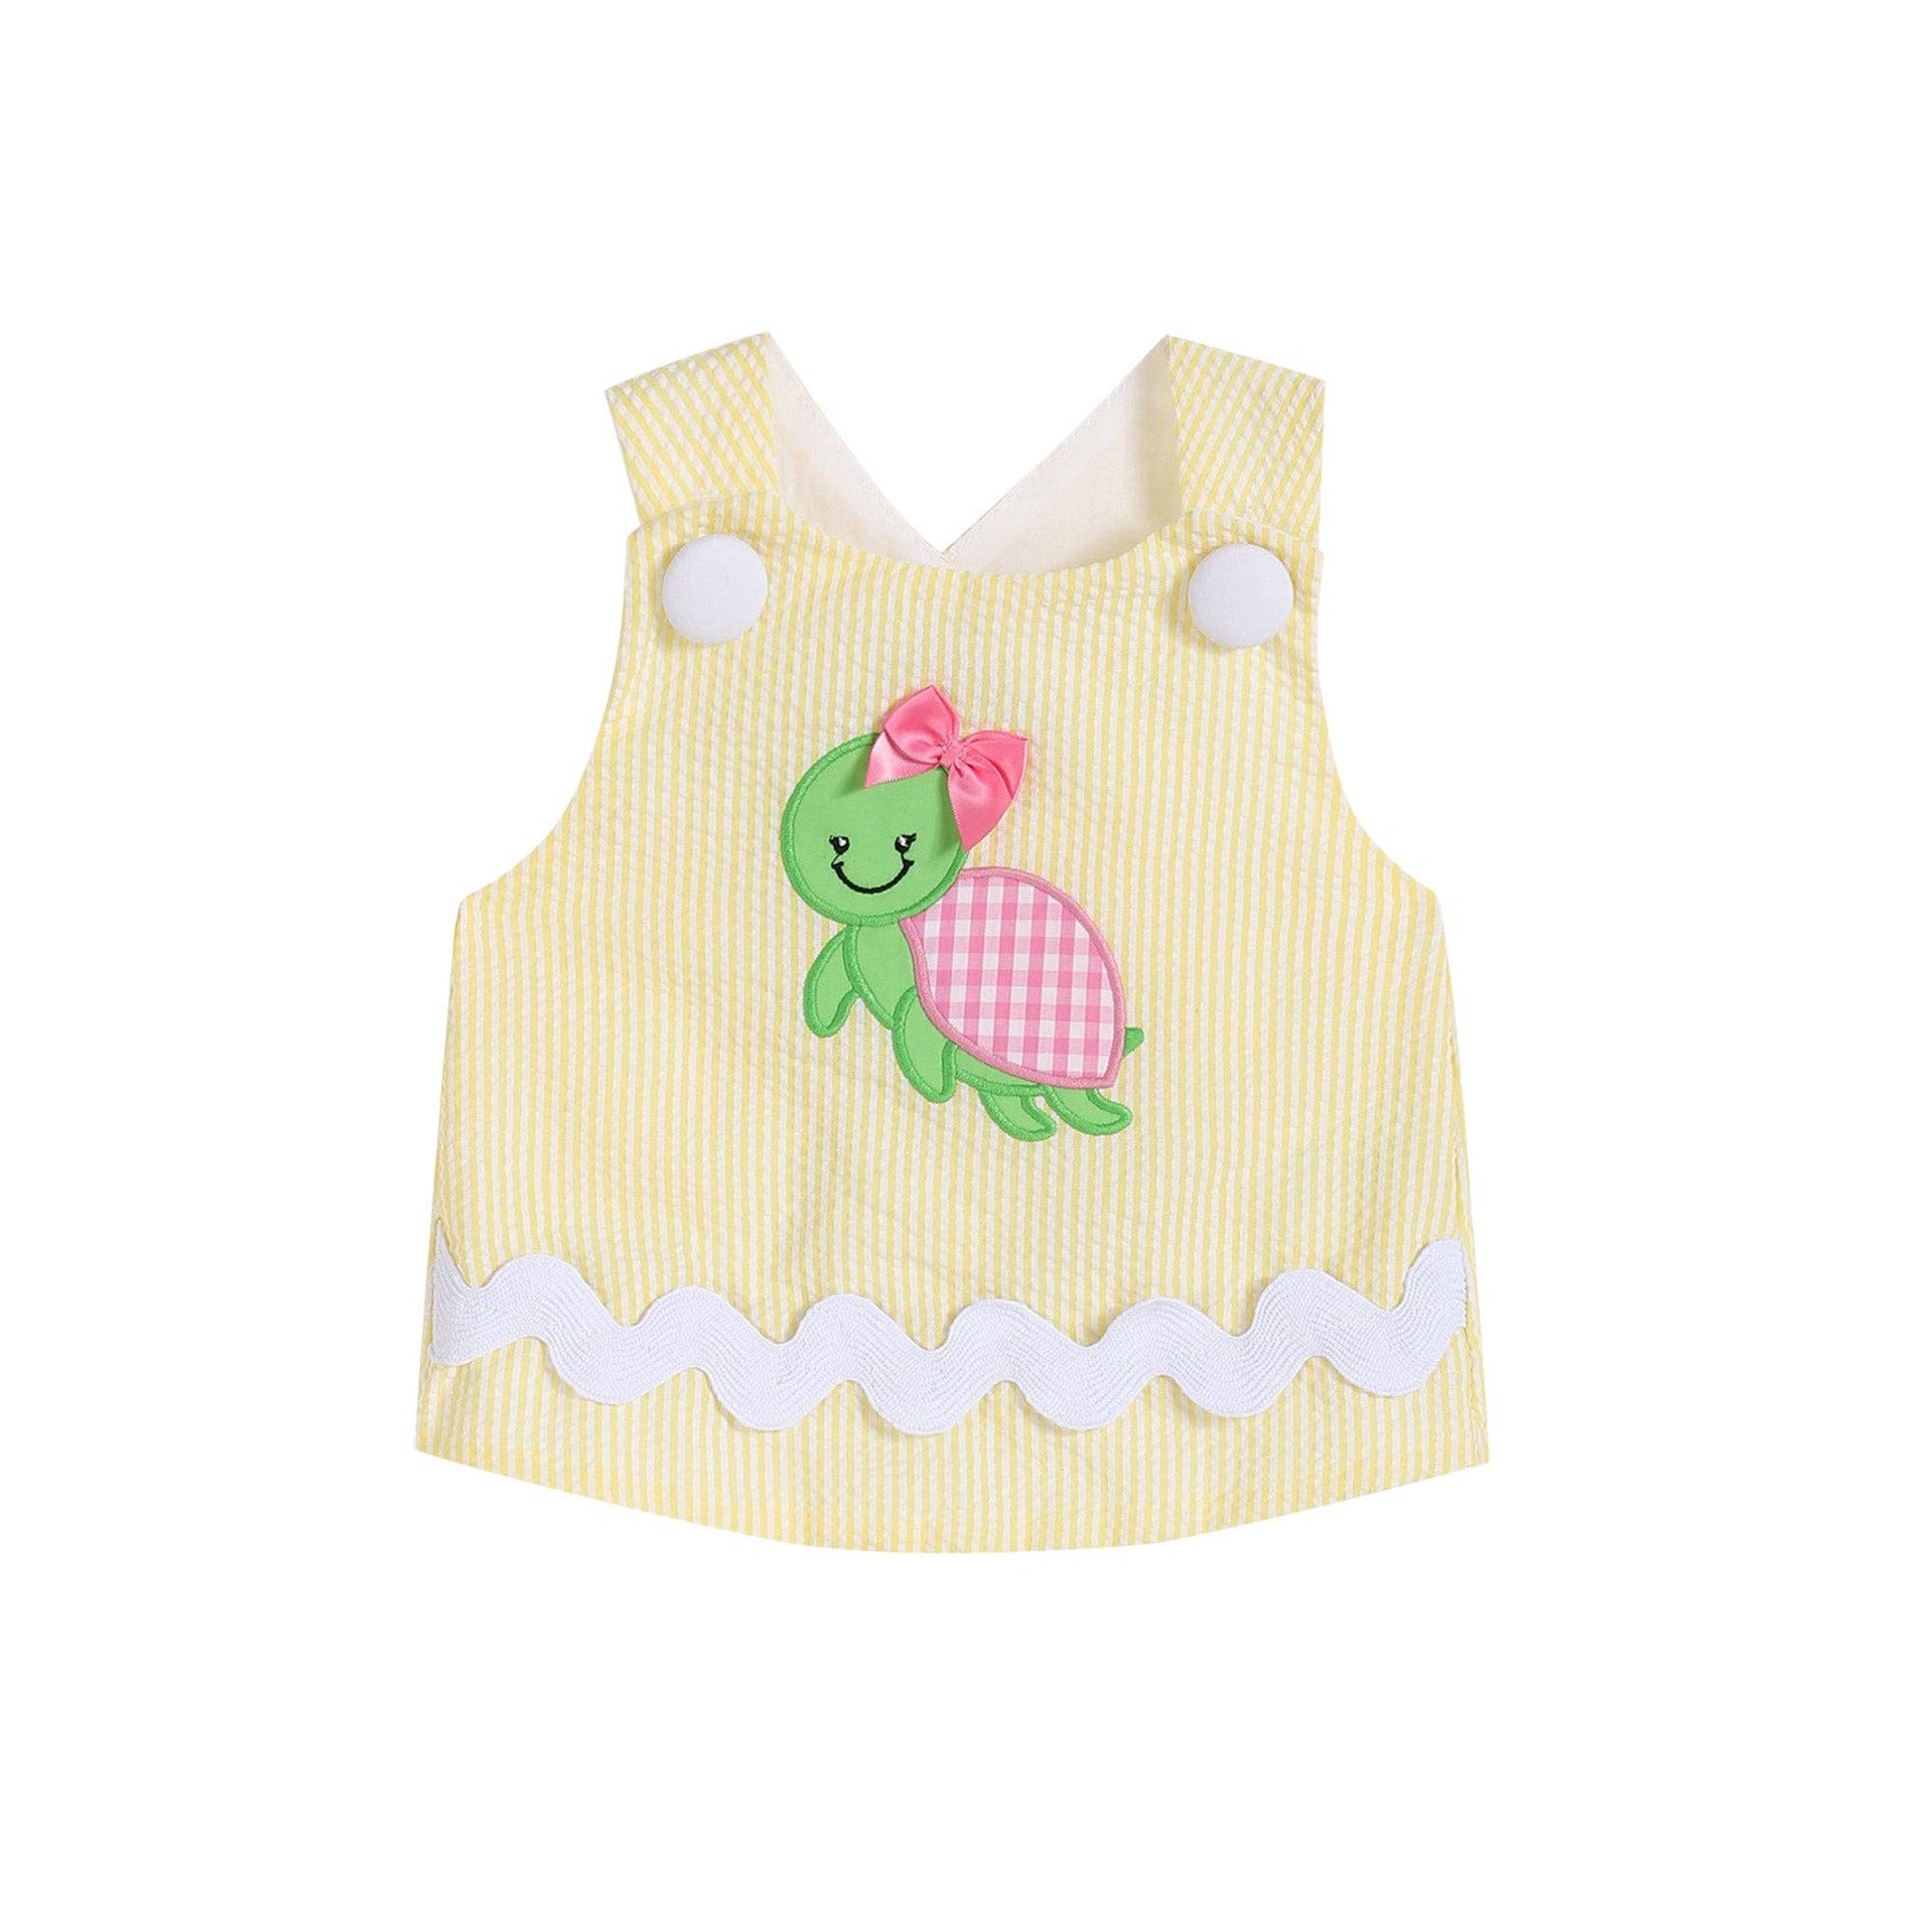 An adorable Yellow Seersucker Turtle 2pc Baby Bloomer Set: 12-18M by Lil Cactus with a cute pink turtle on it.